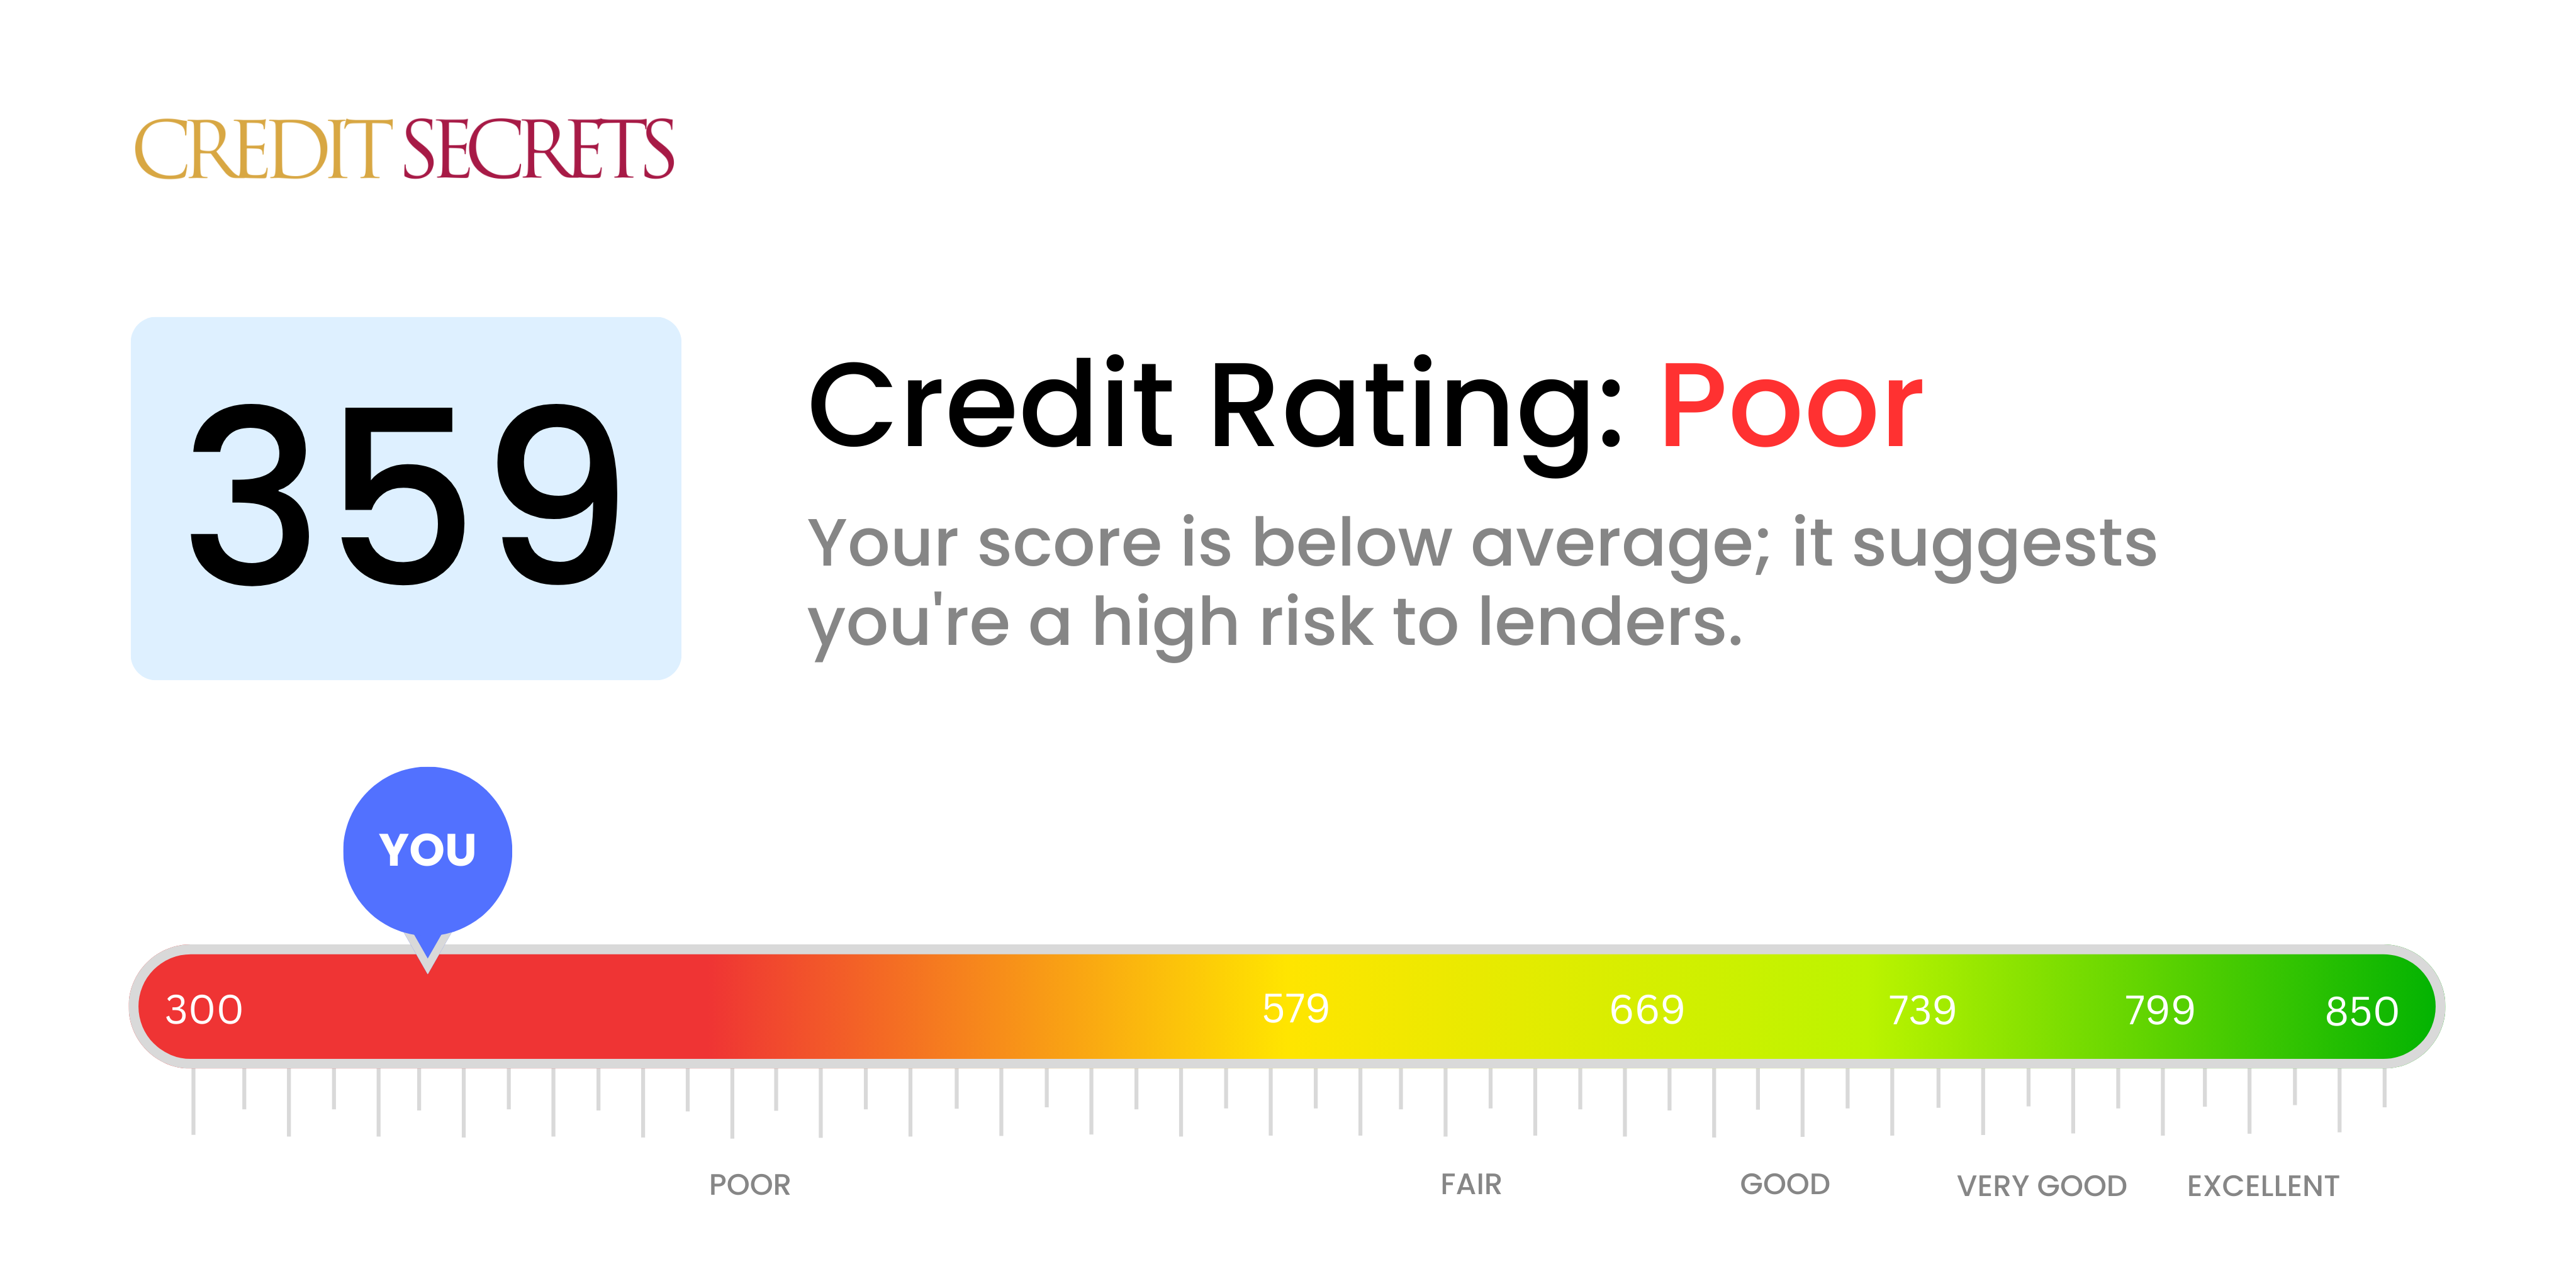 Is 359 a good credit score?